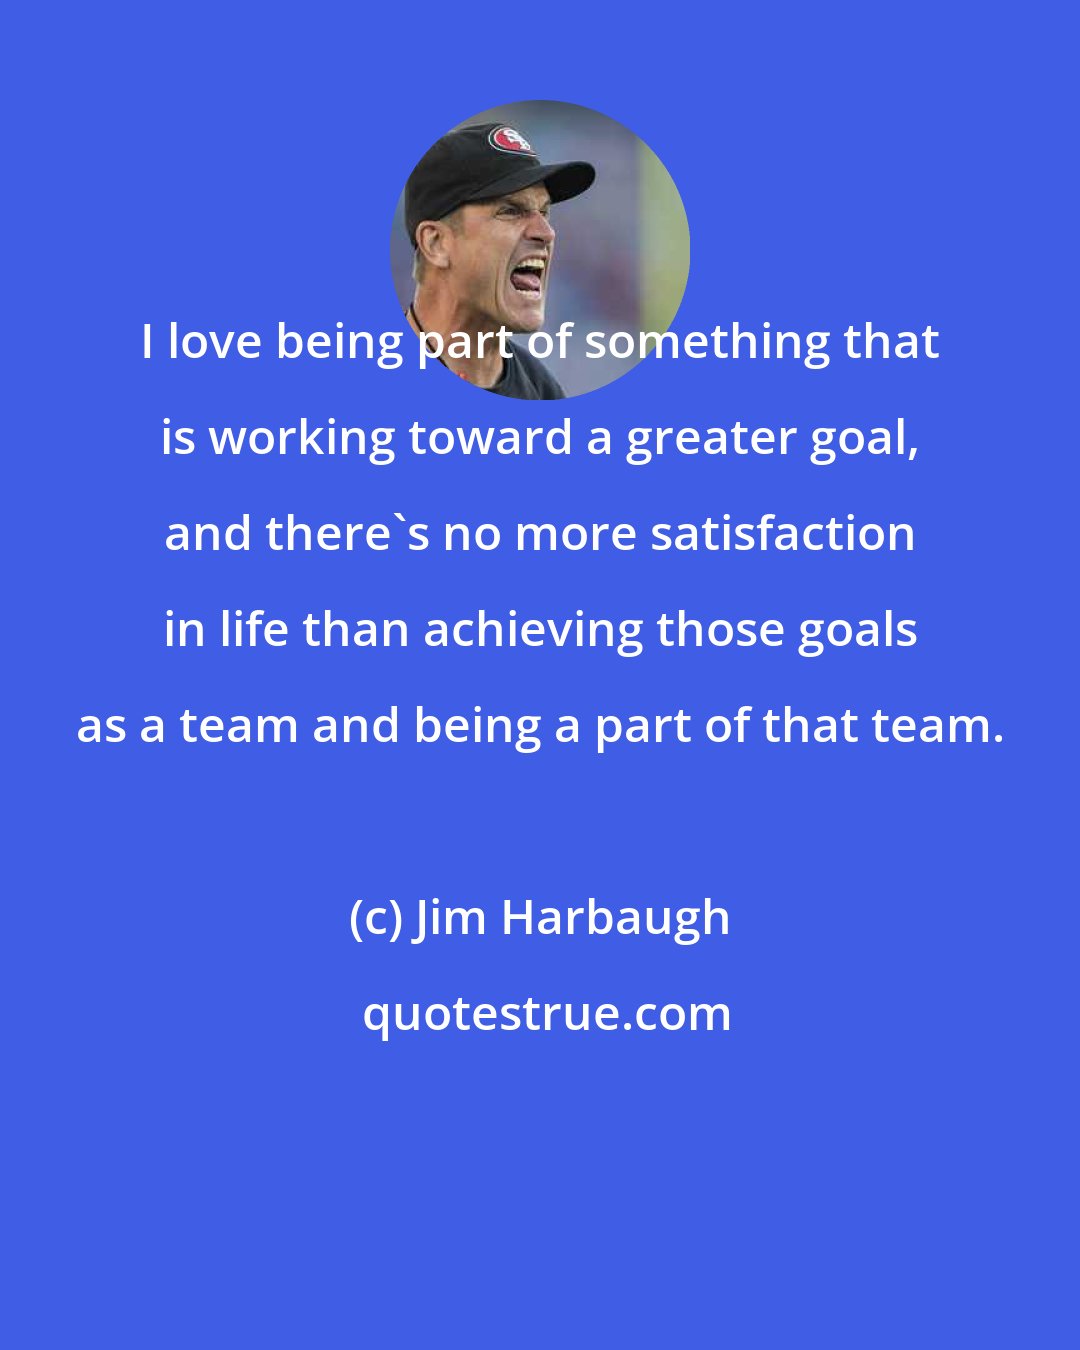 Jim Harbaugh: I love being part of something that is working toward a greater goal, and there's no more satisfaction in life than achieving those goals as a team and being a part of that team.